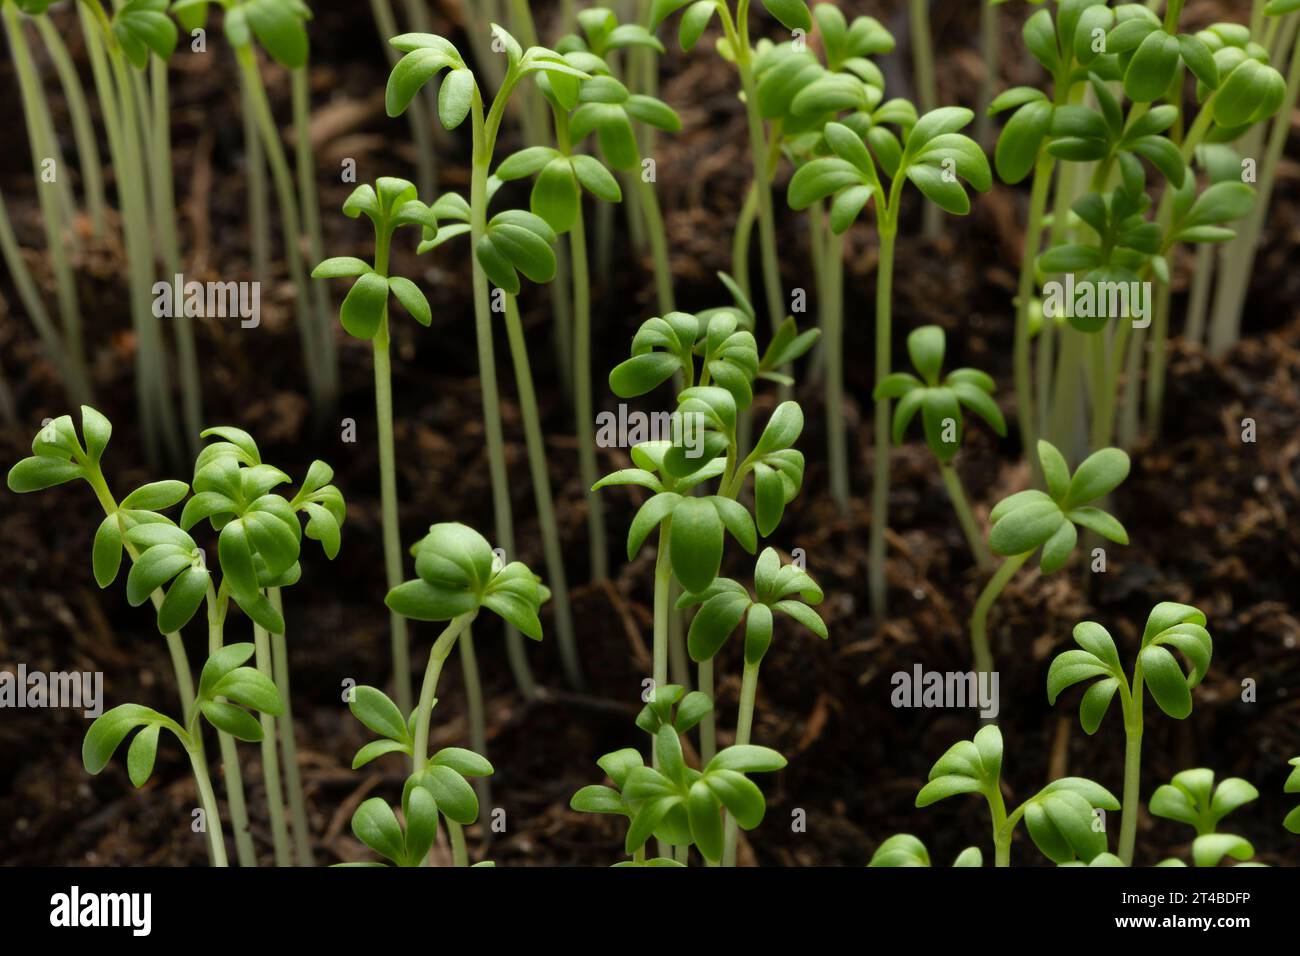 Fresh green Garden cress sprouts homegrown close up Stock Photo